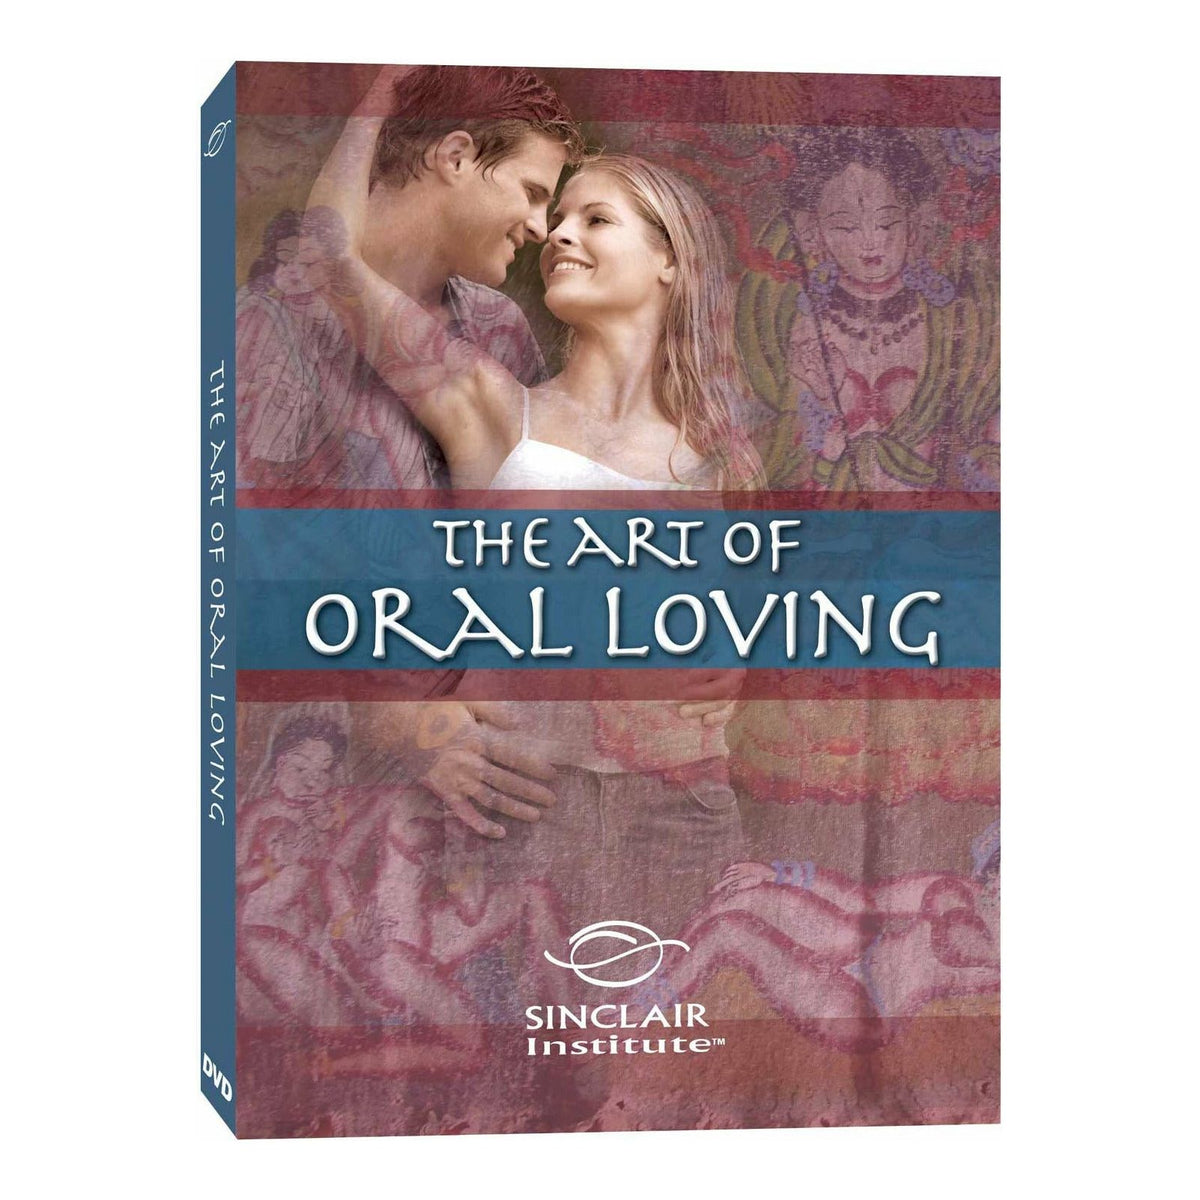 Sinclair Intimacy Institute The Art of Oral Loving - DVD